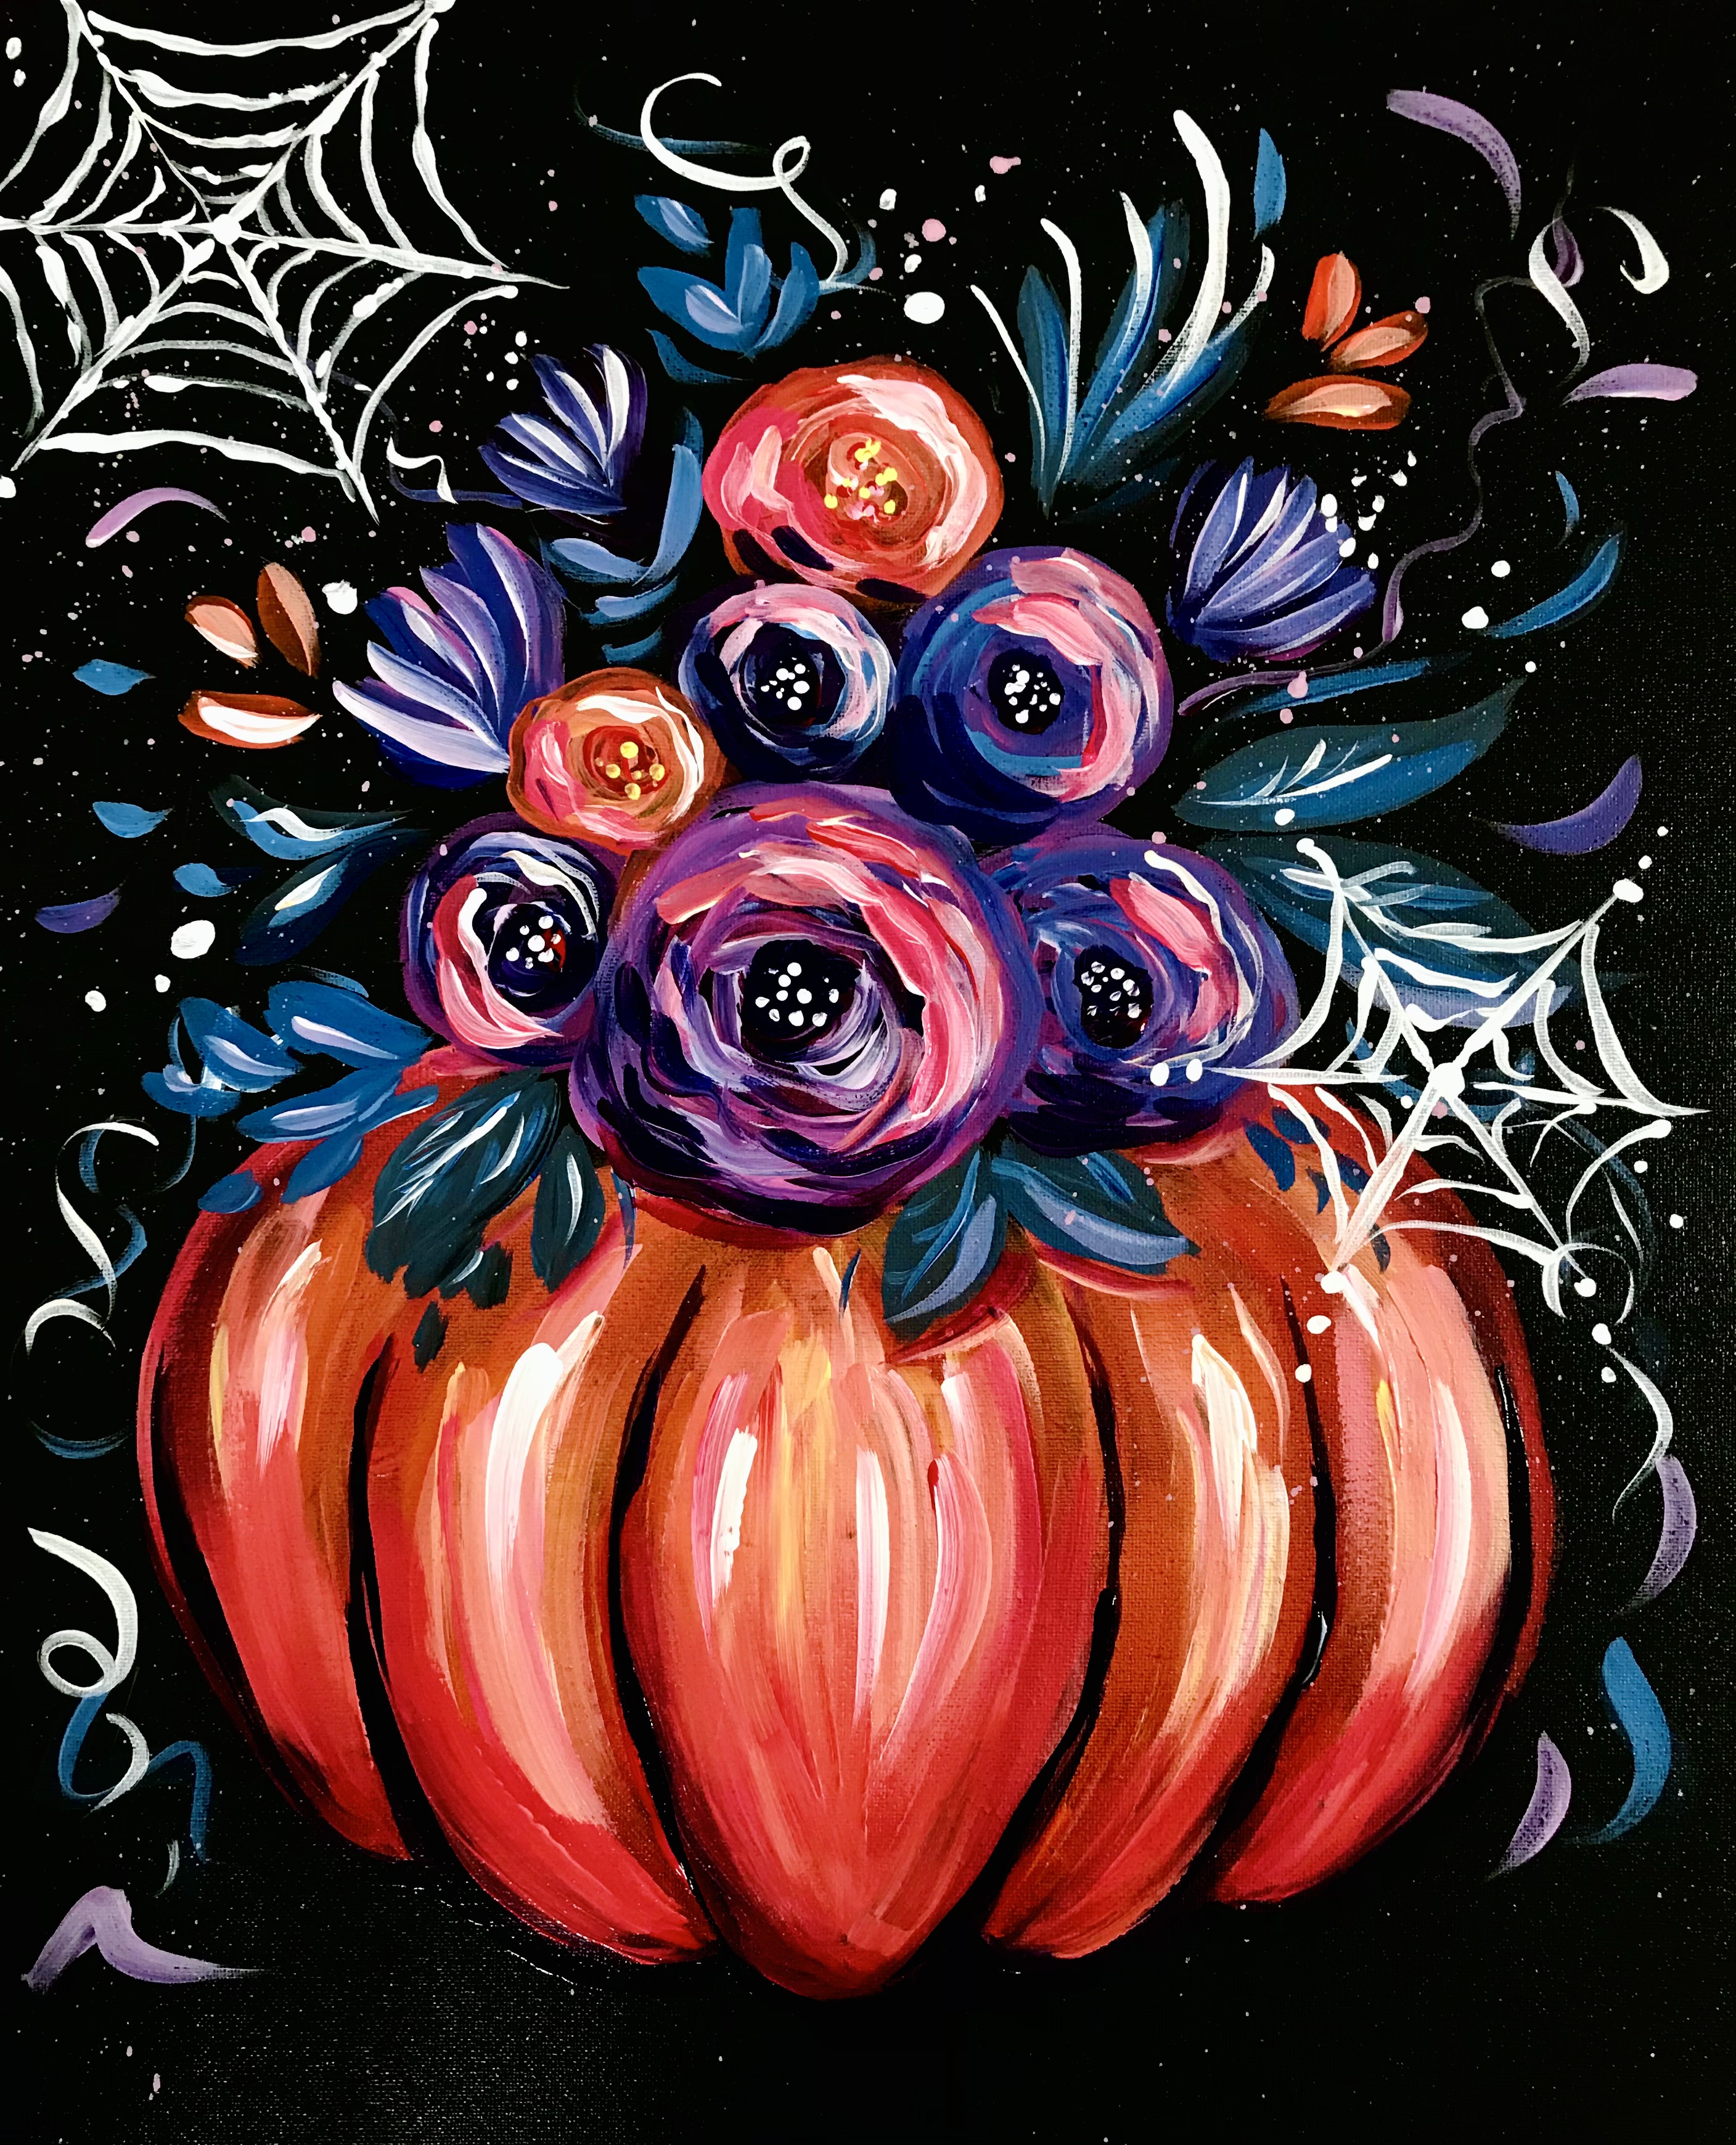 A Spooky Pumpkin Bouquet experience project by Yaymaker